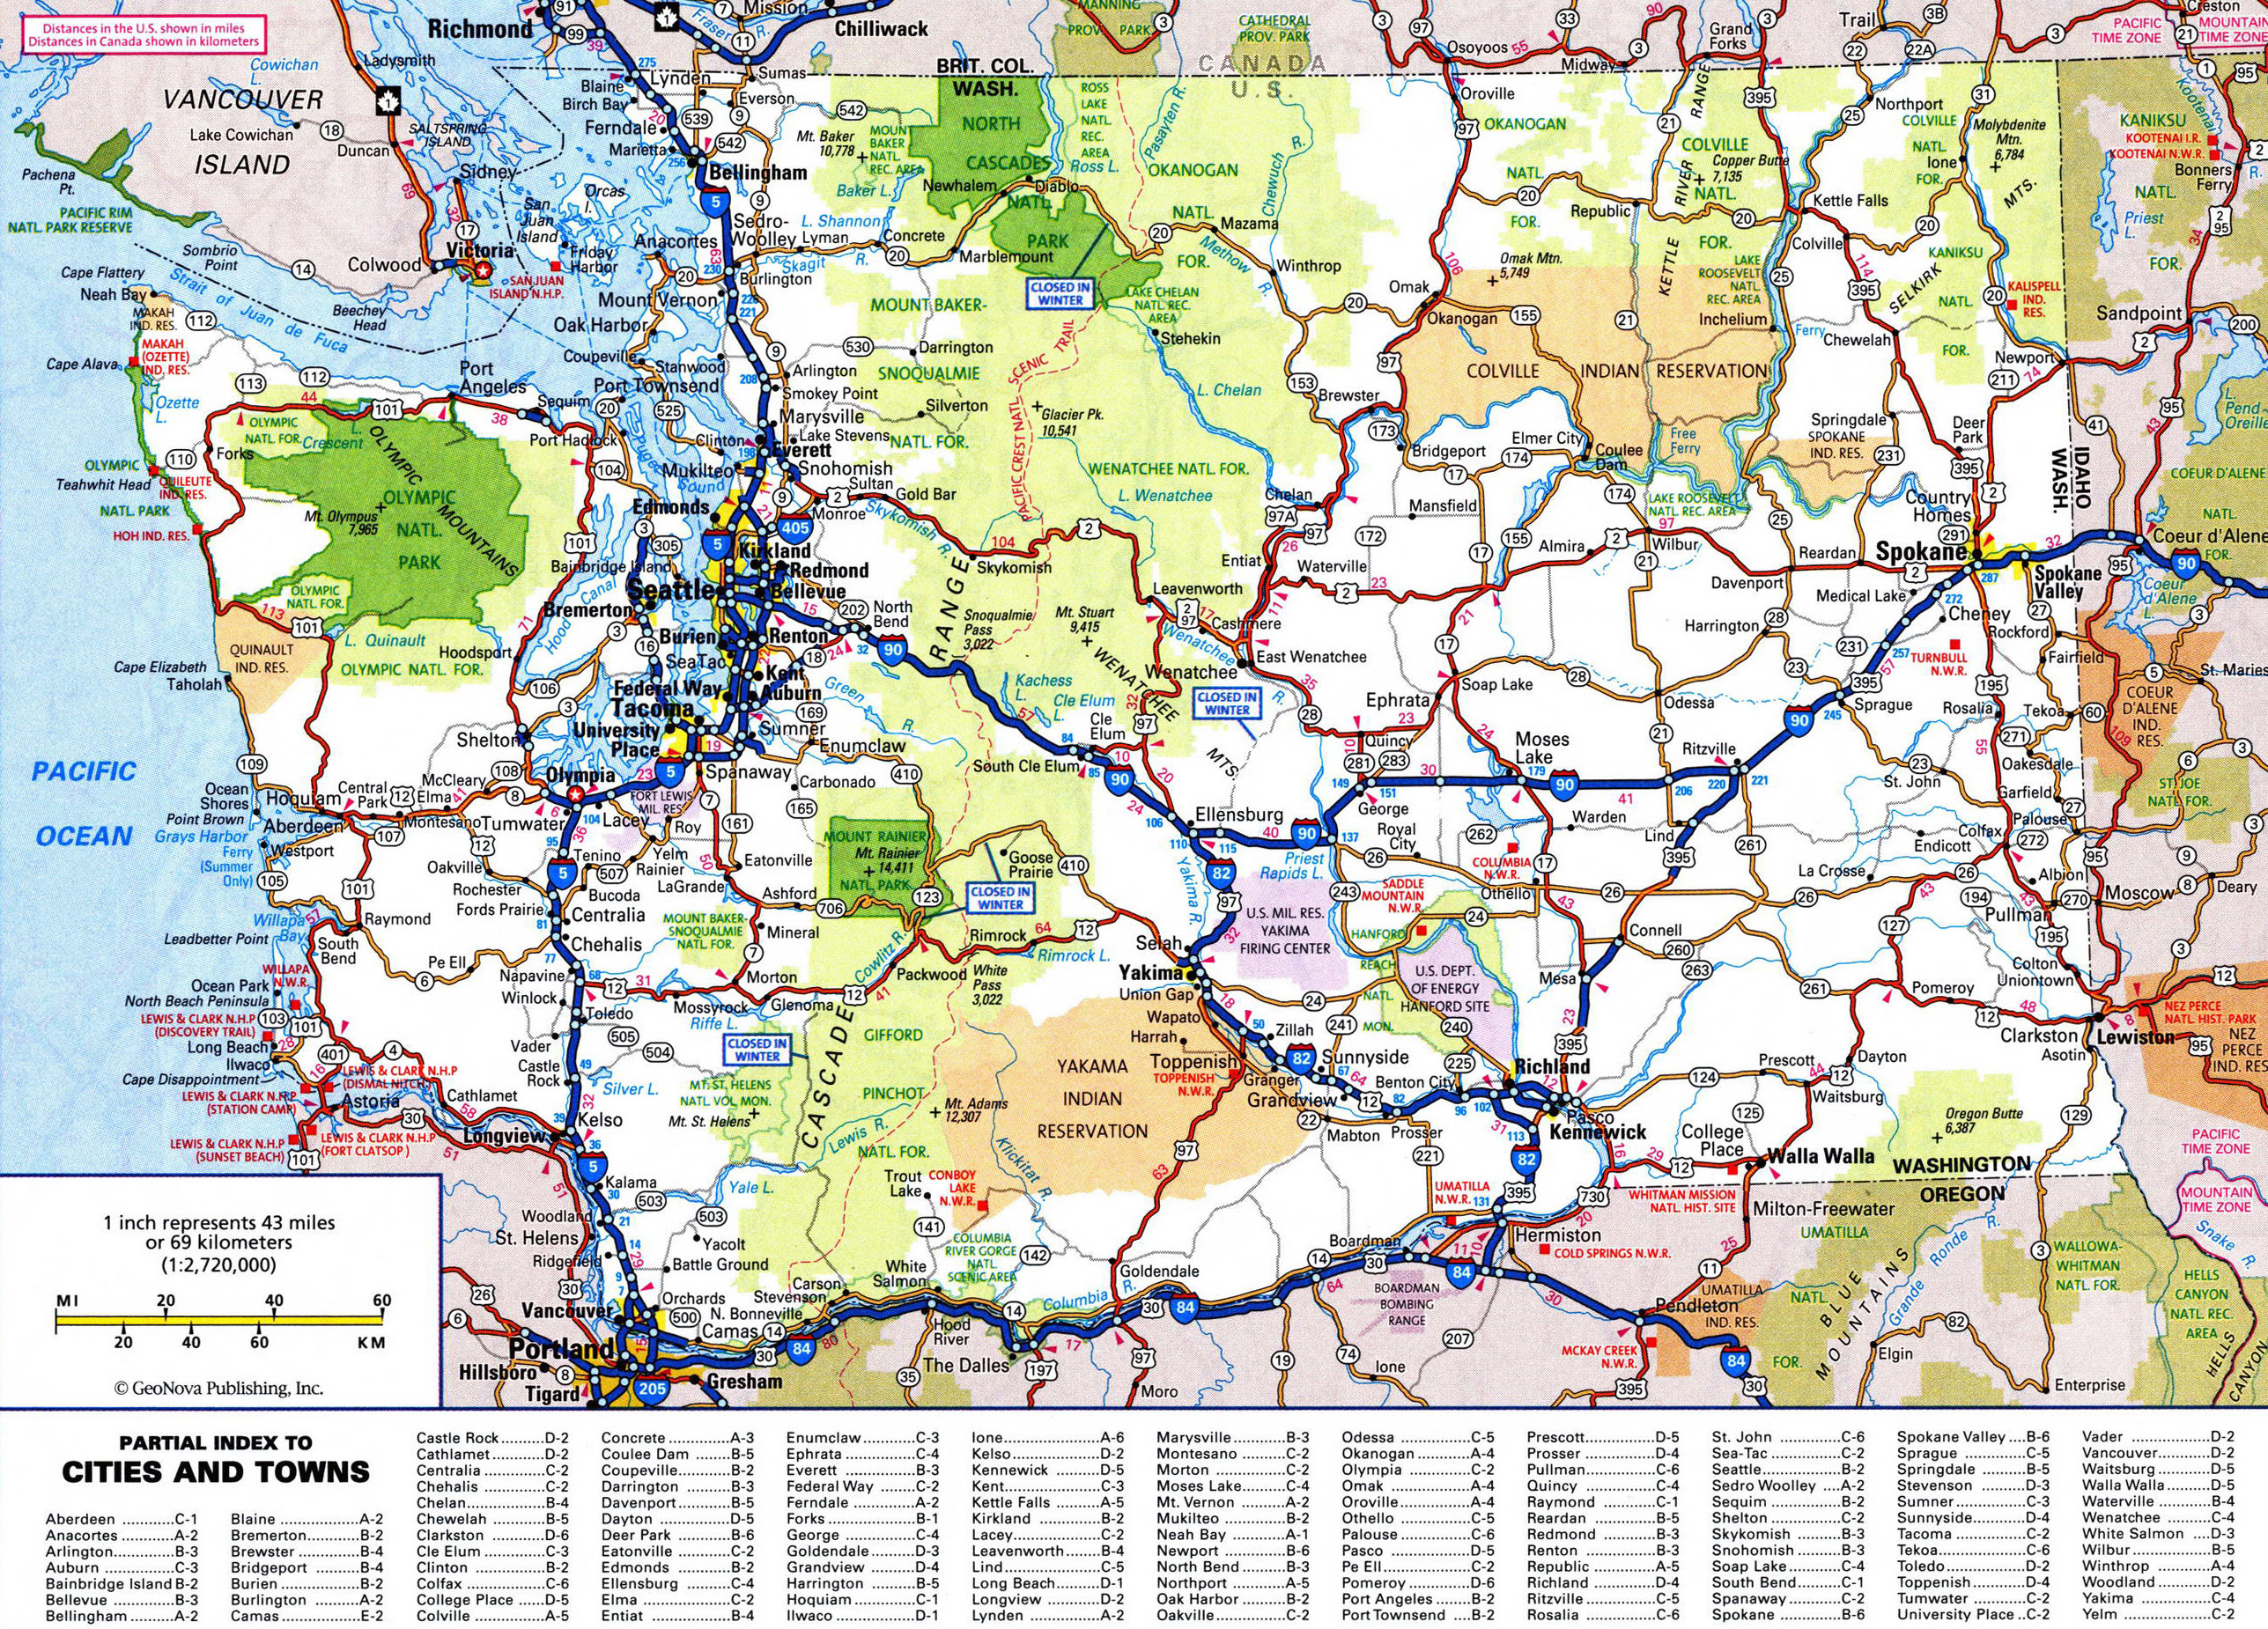 large-detailed-roads-and-highways-map-of-washington-state-with-all